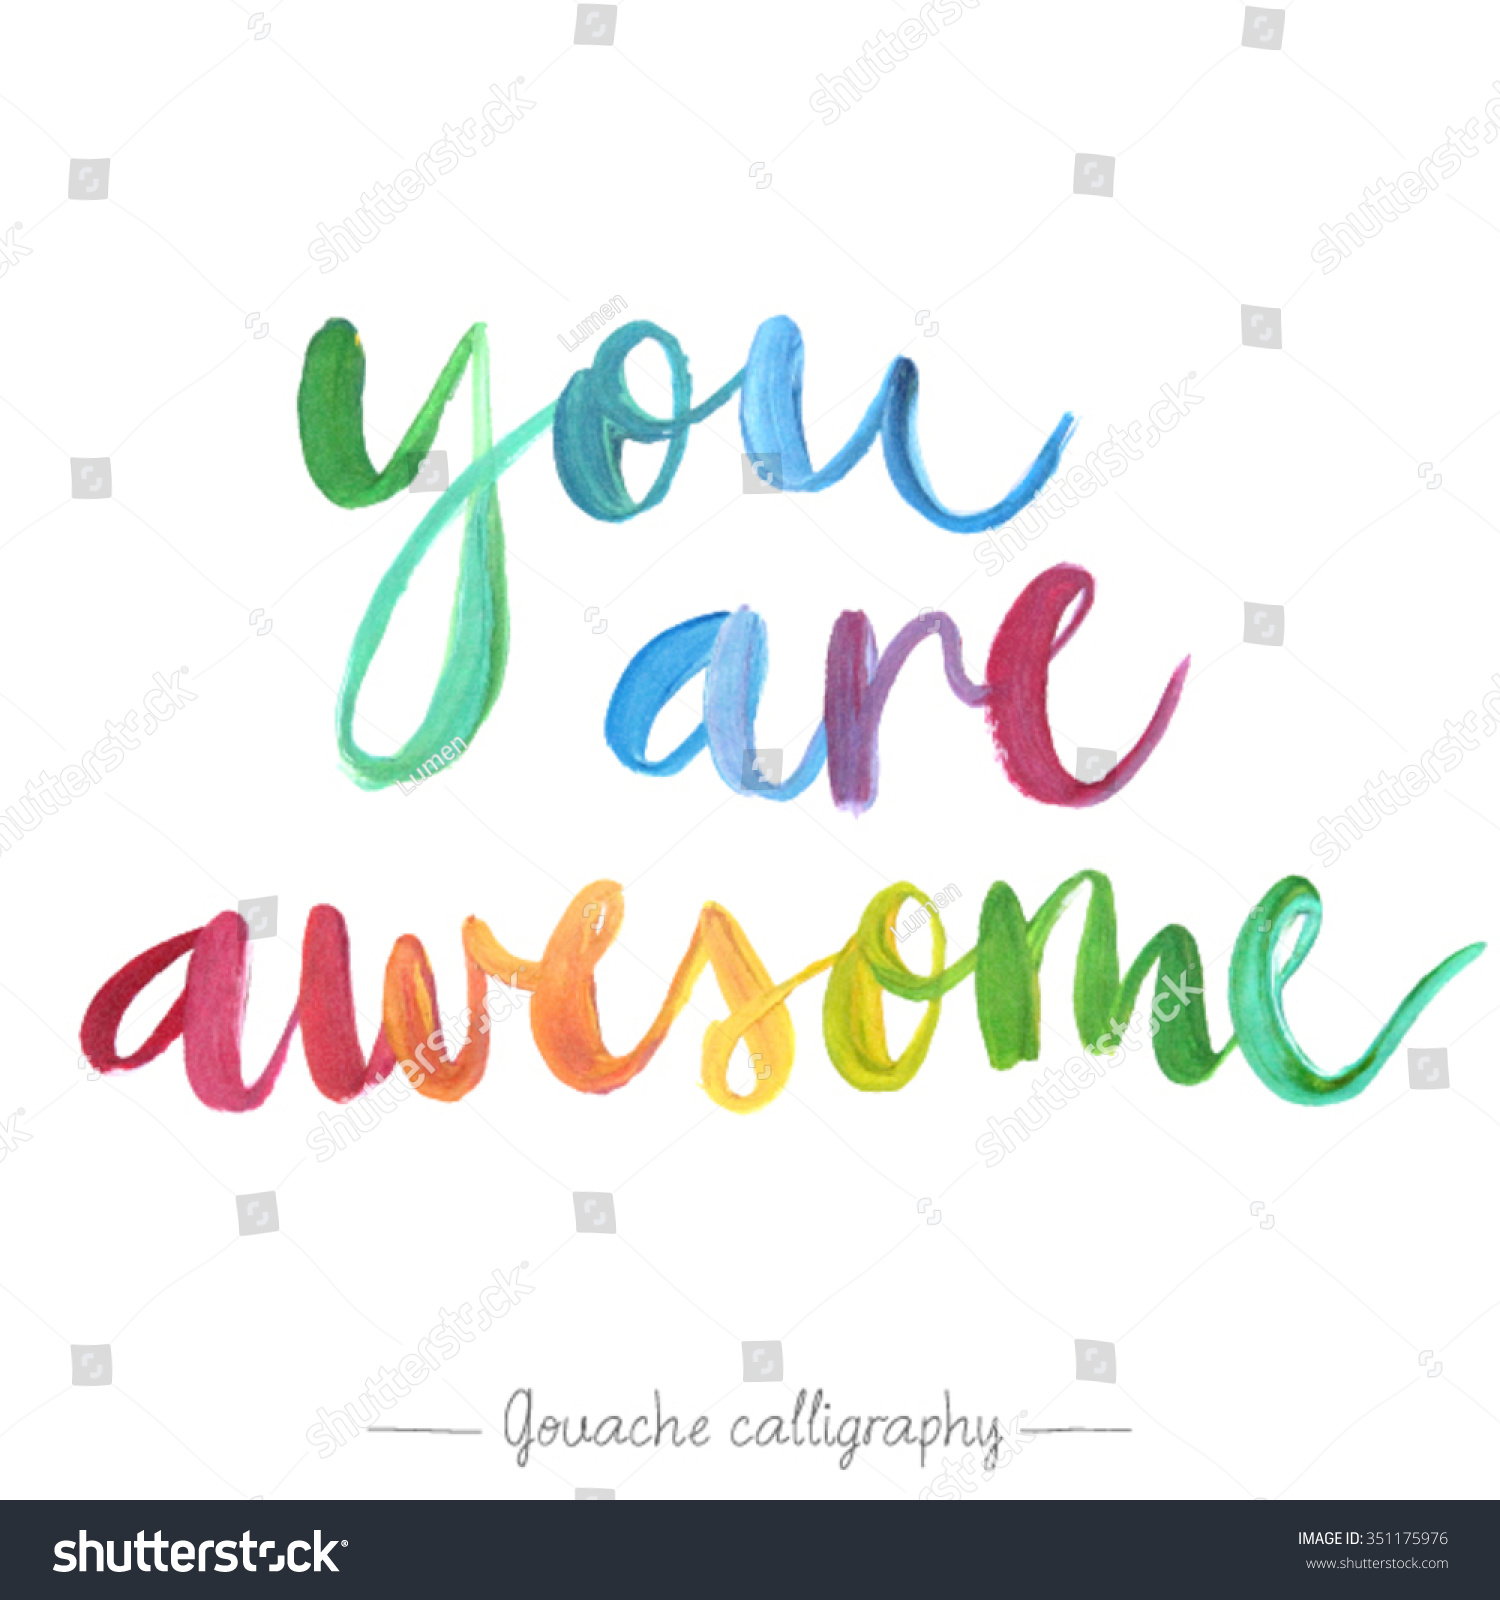 you're awesome clipart - photo #20